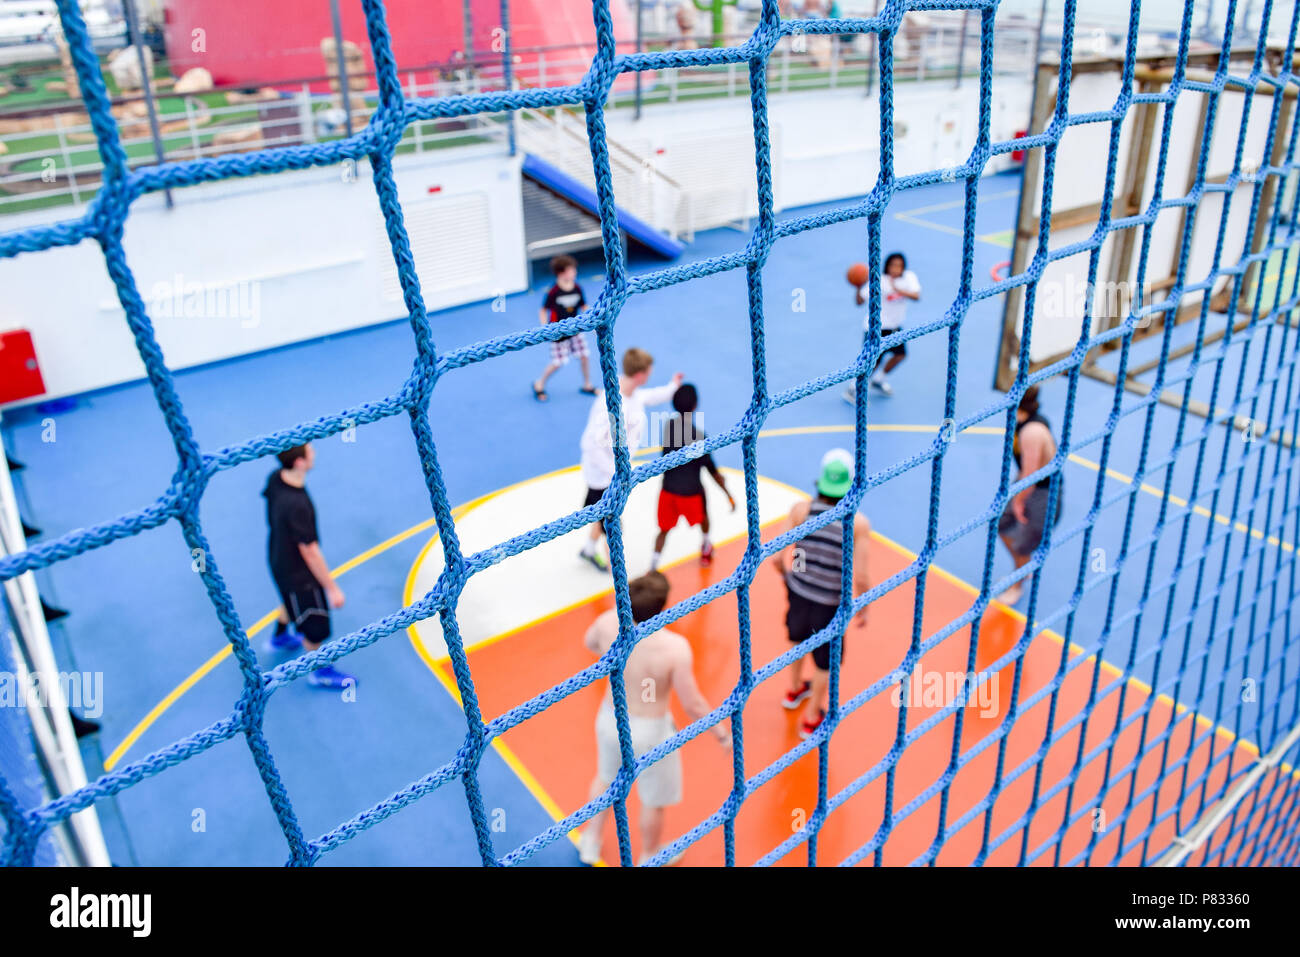 Miami, Florida - March 29 2014: Netting around basketball court and a game in session, onboard the Carnival Liberty cruise ship Stock Photo